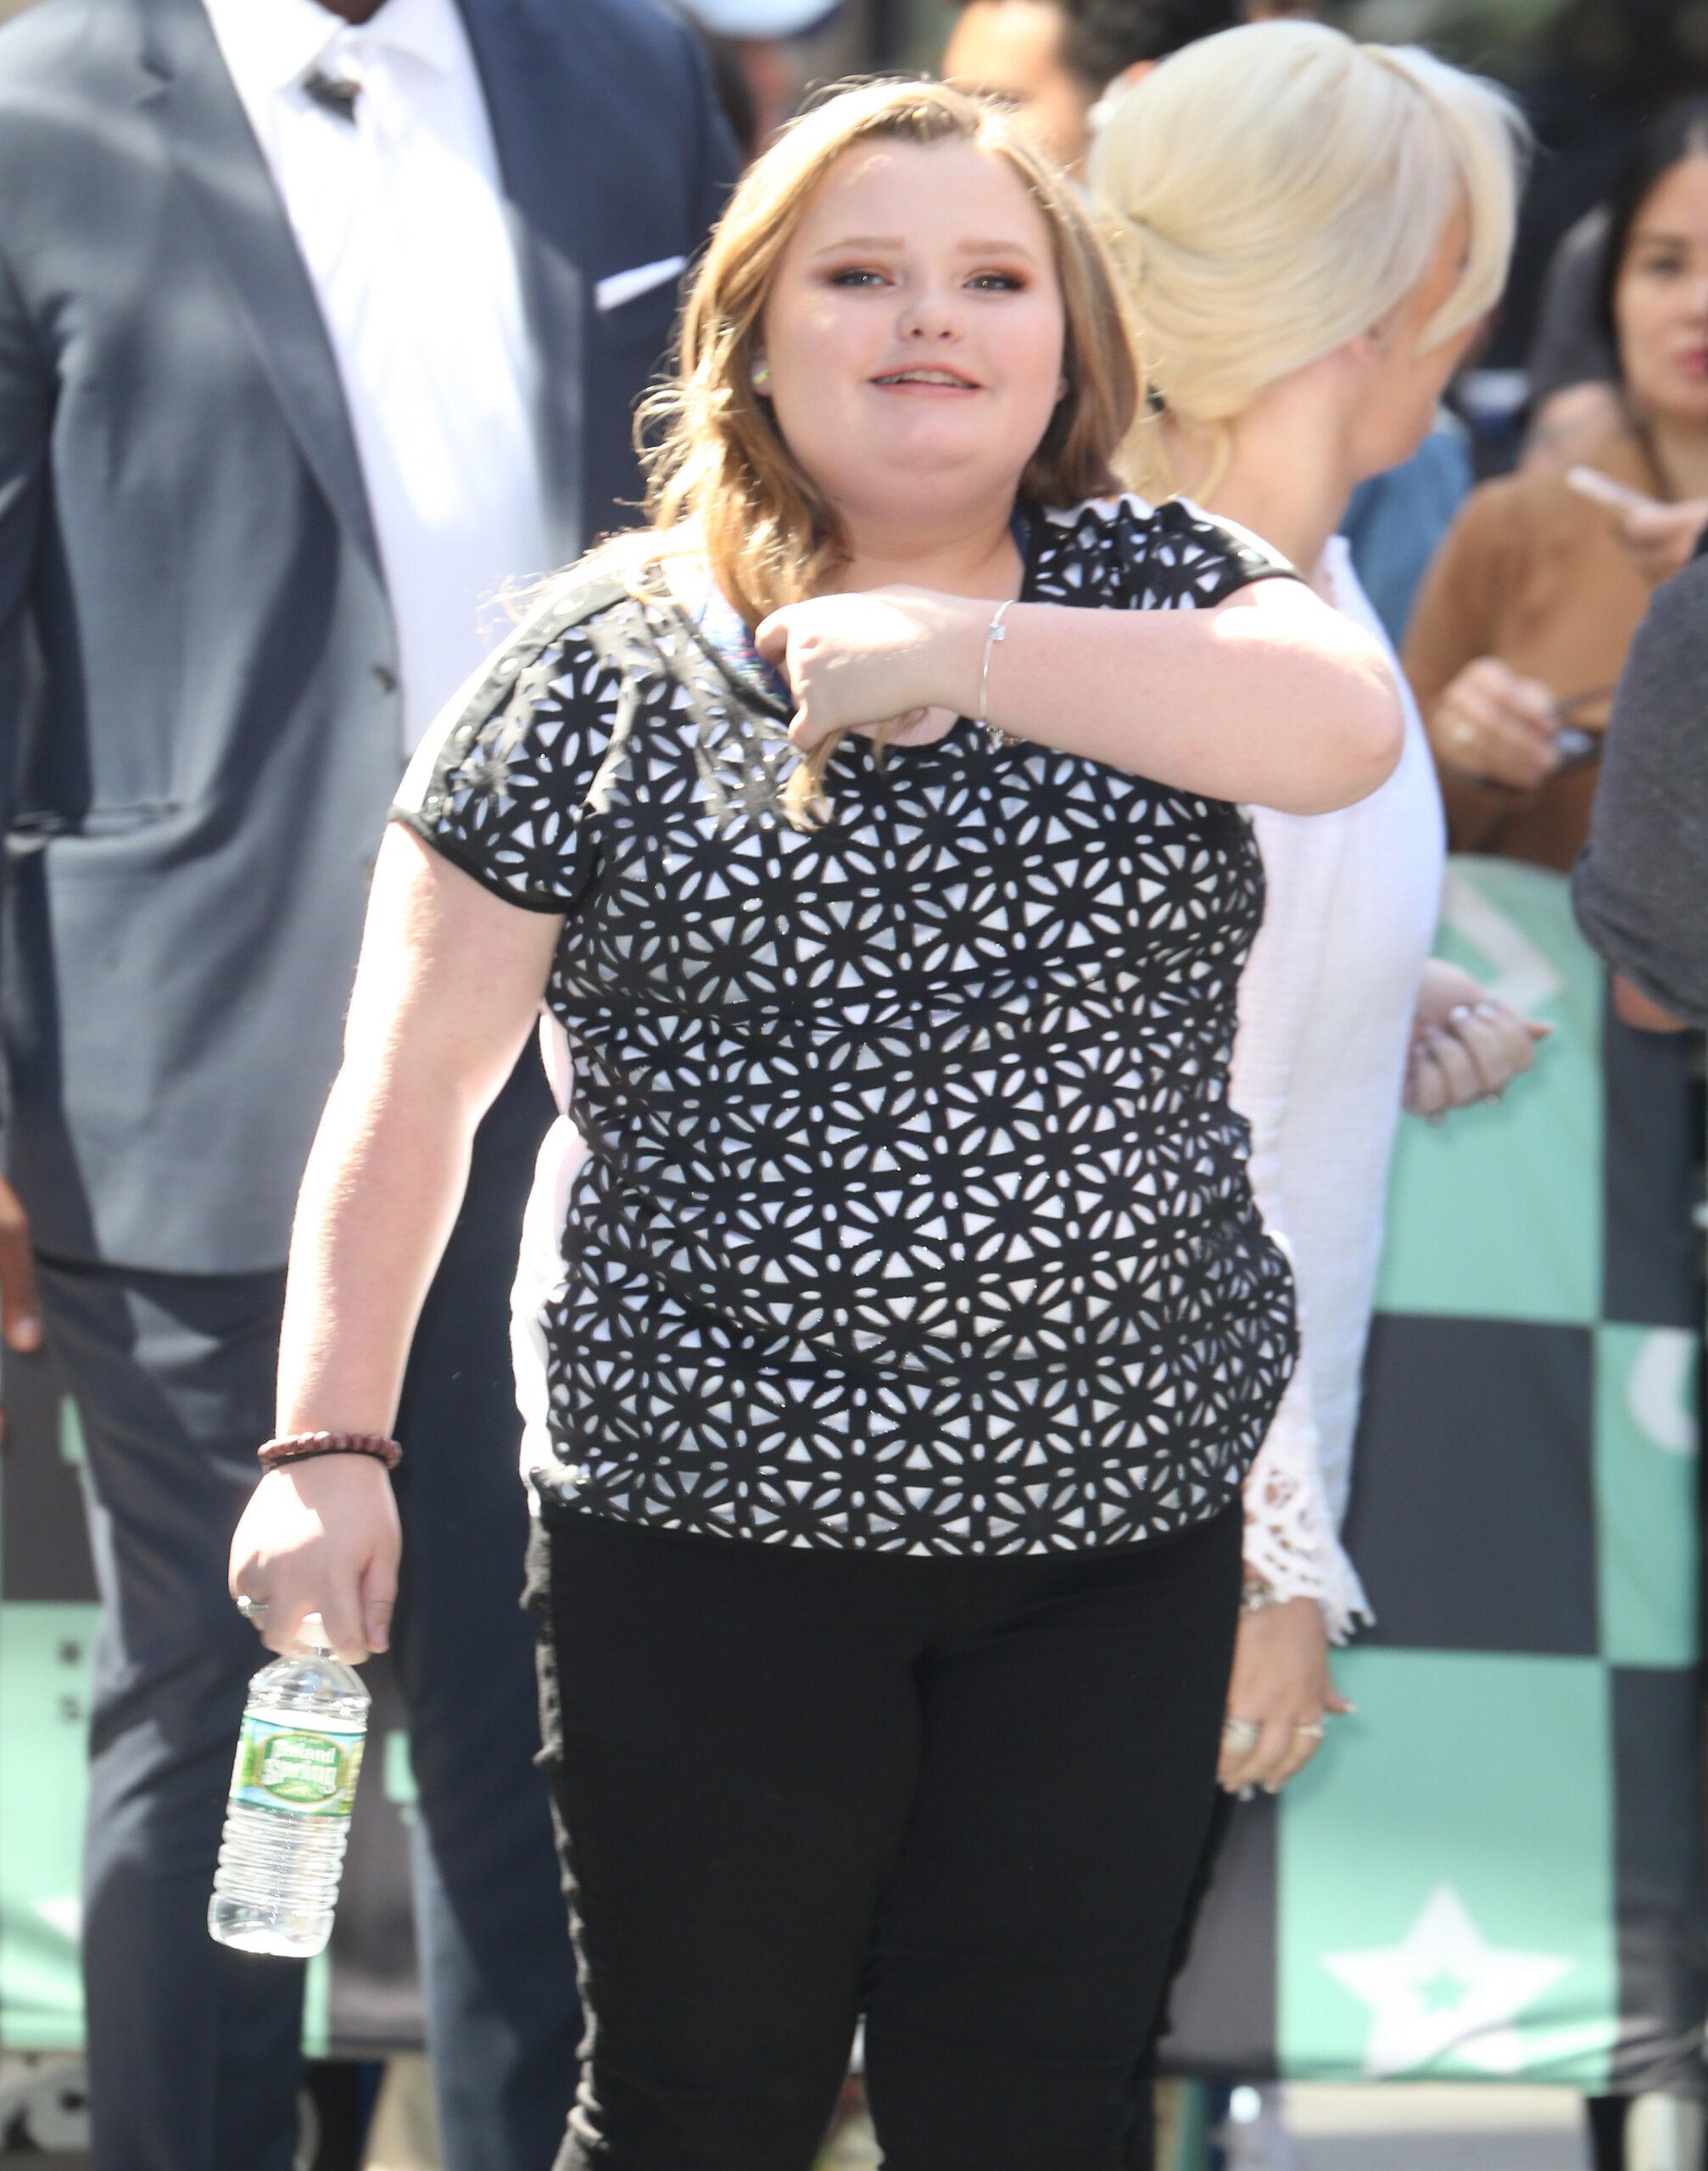 Honey Boo Boo Has A 20-Year-Old Boyfriend?! She's Only 16!